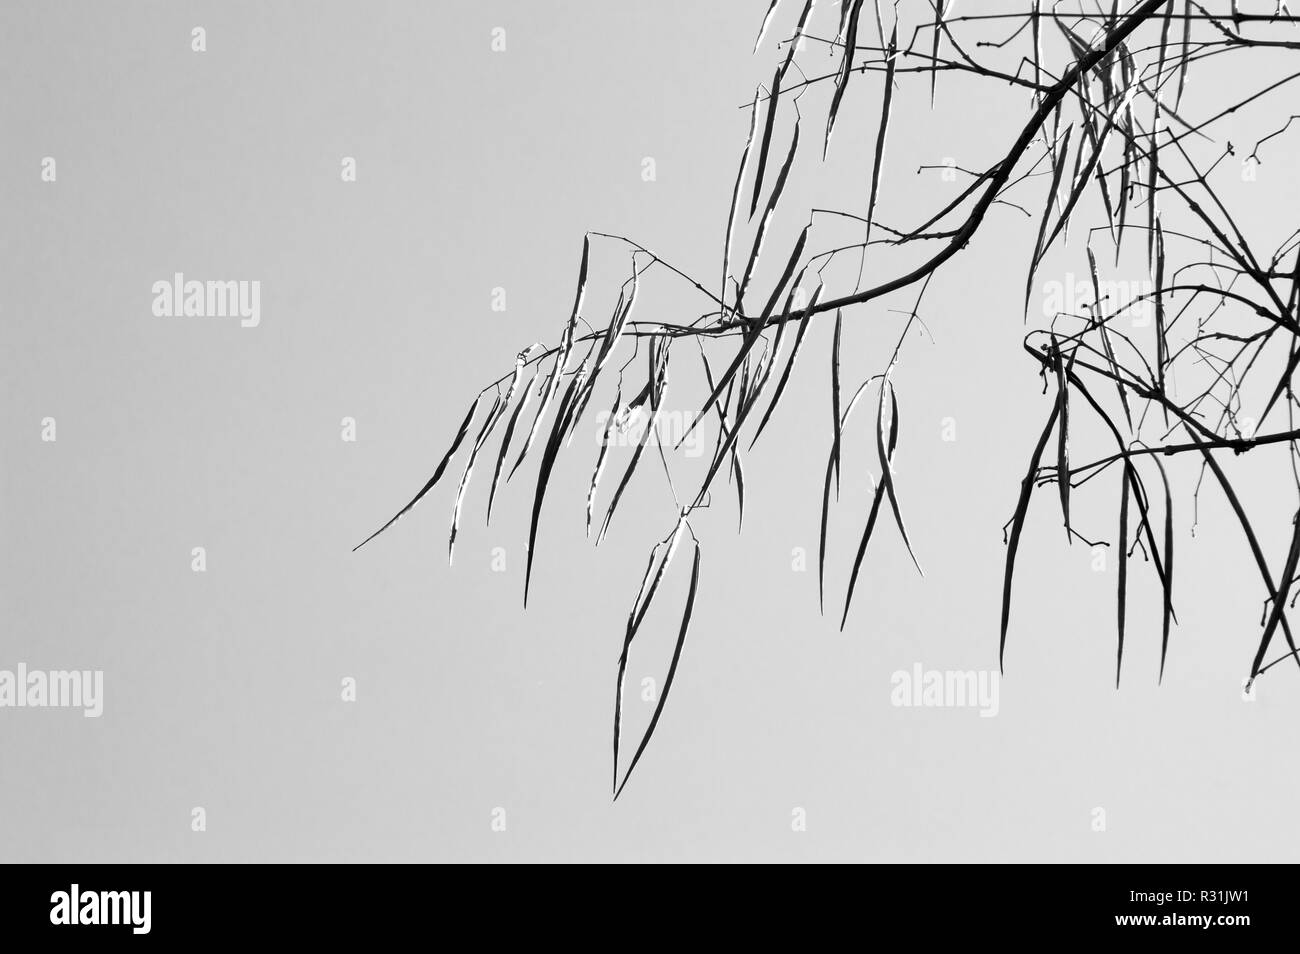 Long tree seed pods hanging from branches in black and white. Stock Photo